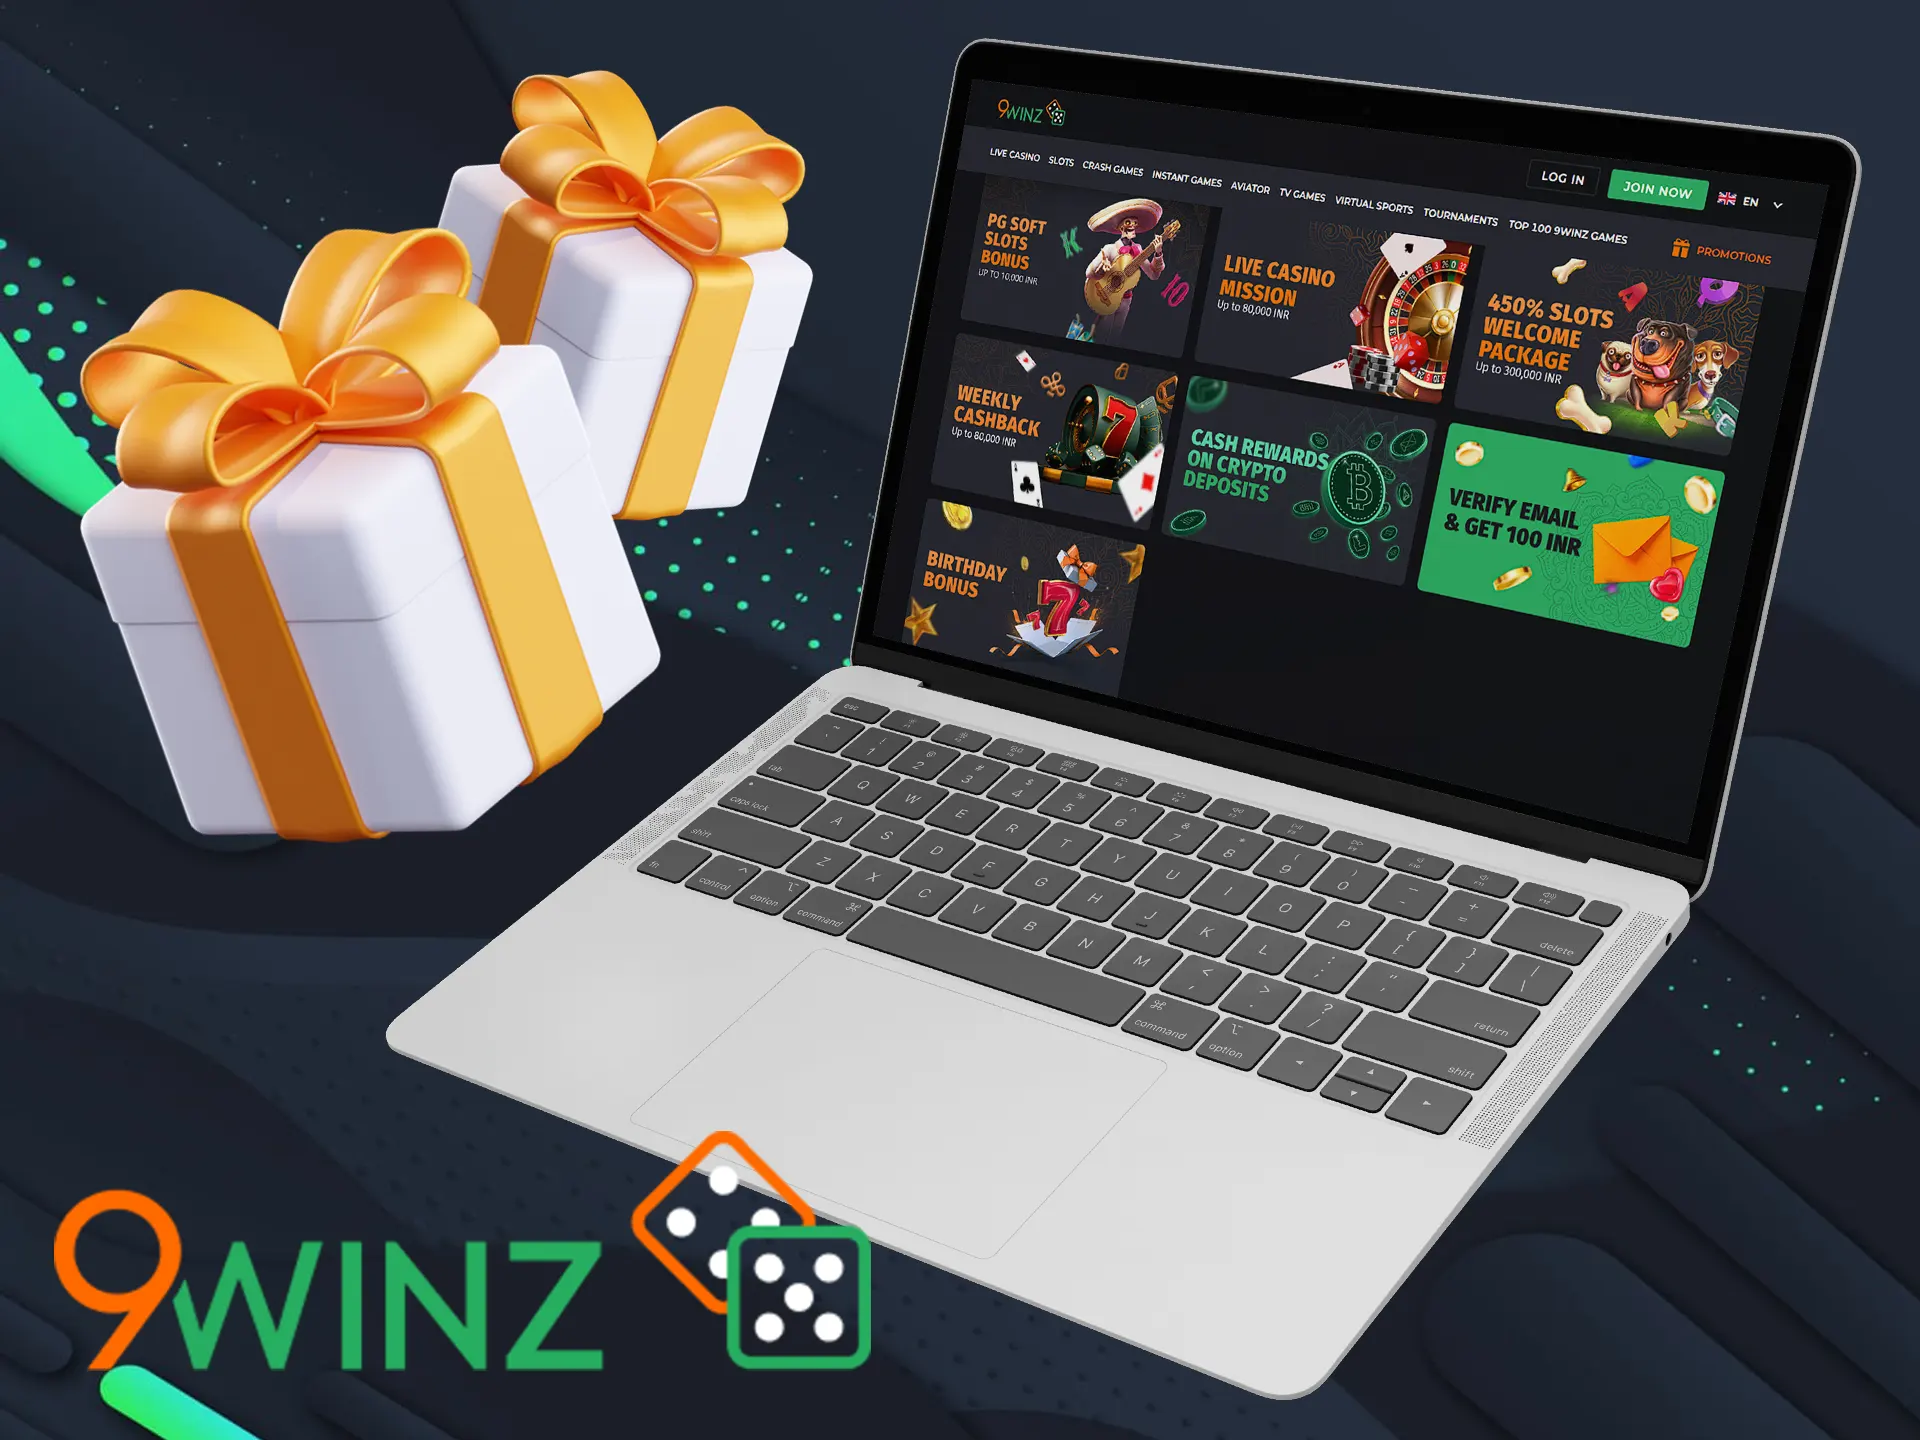 Get your 9winz instant games bonus after playing instant games.